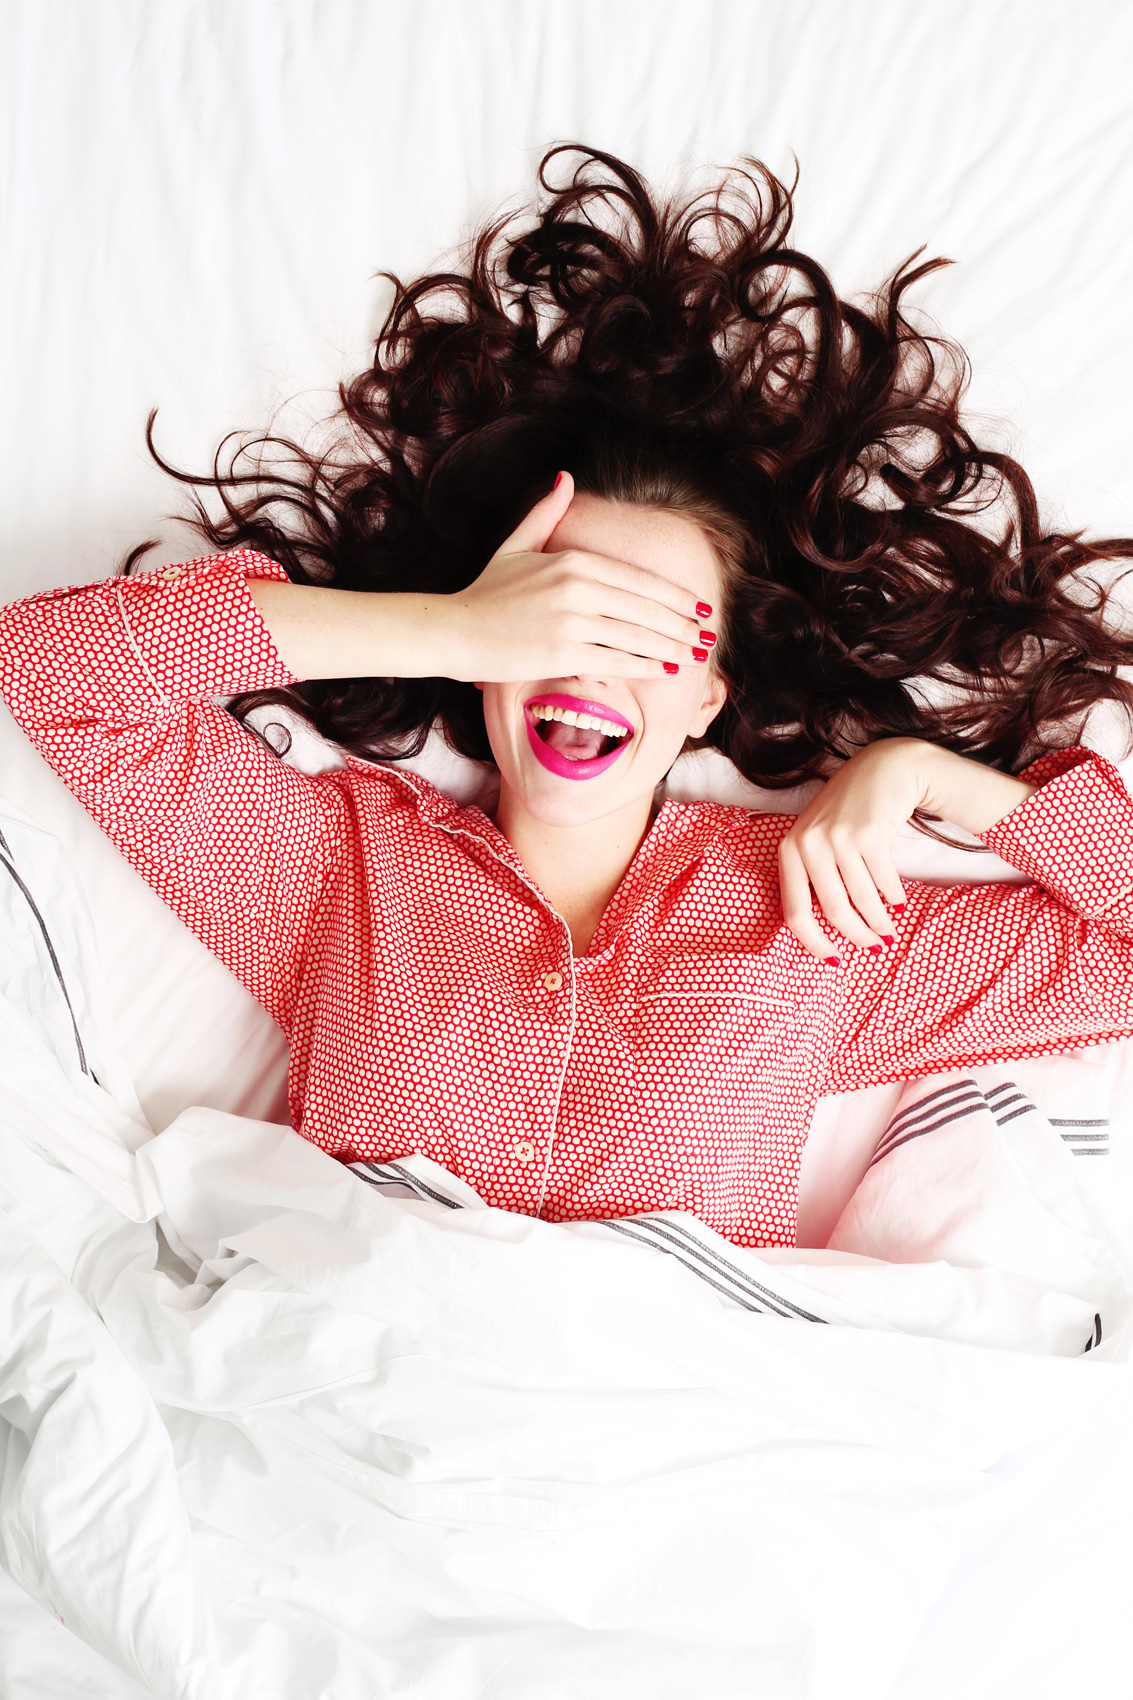 Smiling girl in bed with red polka-dot pyjamas - Kim Genevieve Los Angeles Lifestyle Photographer